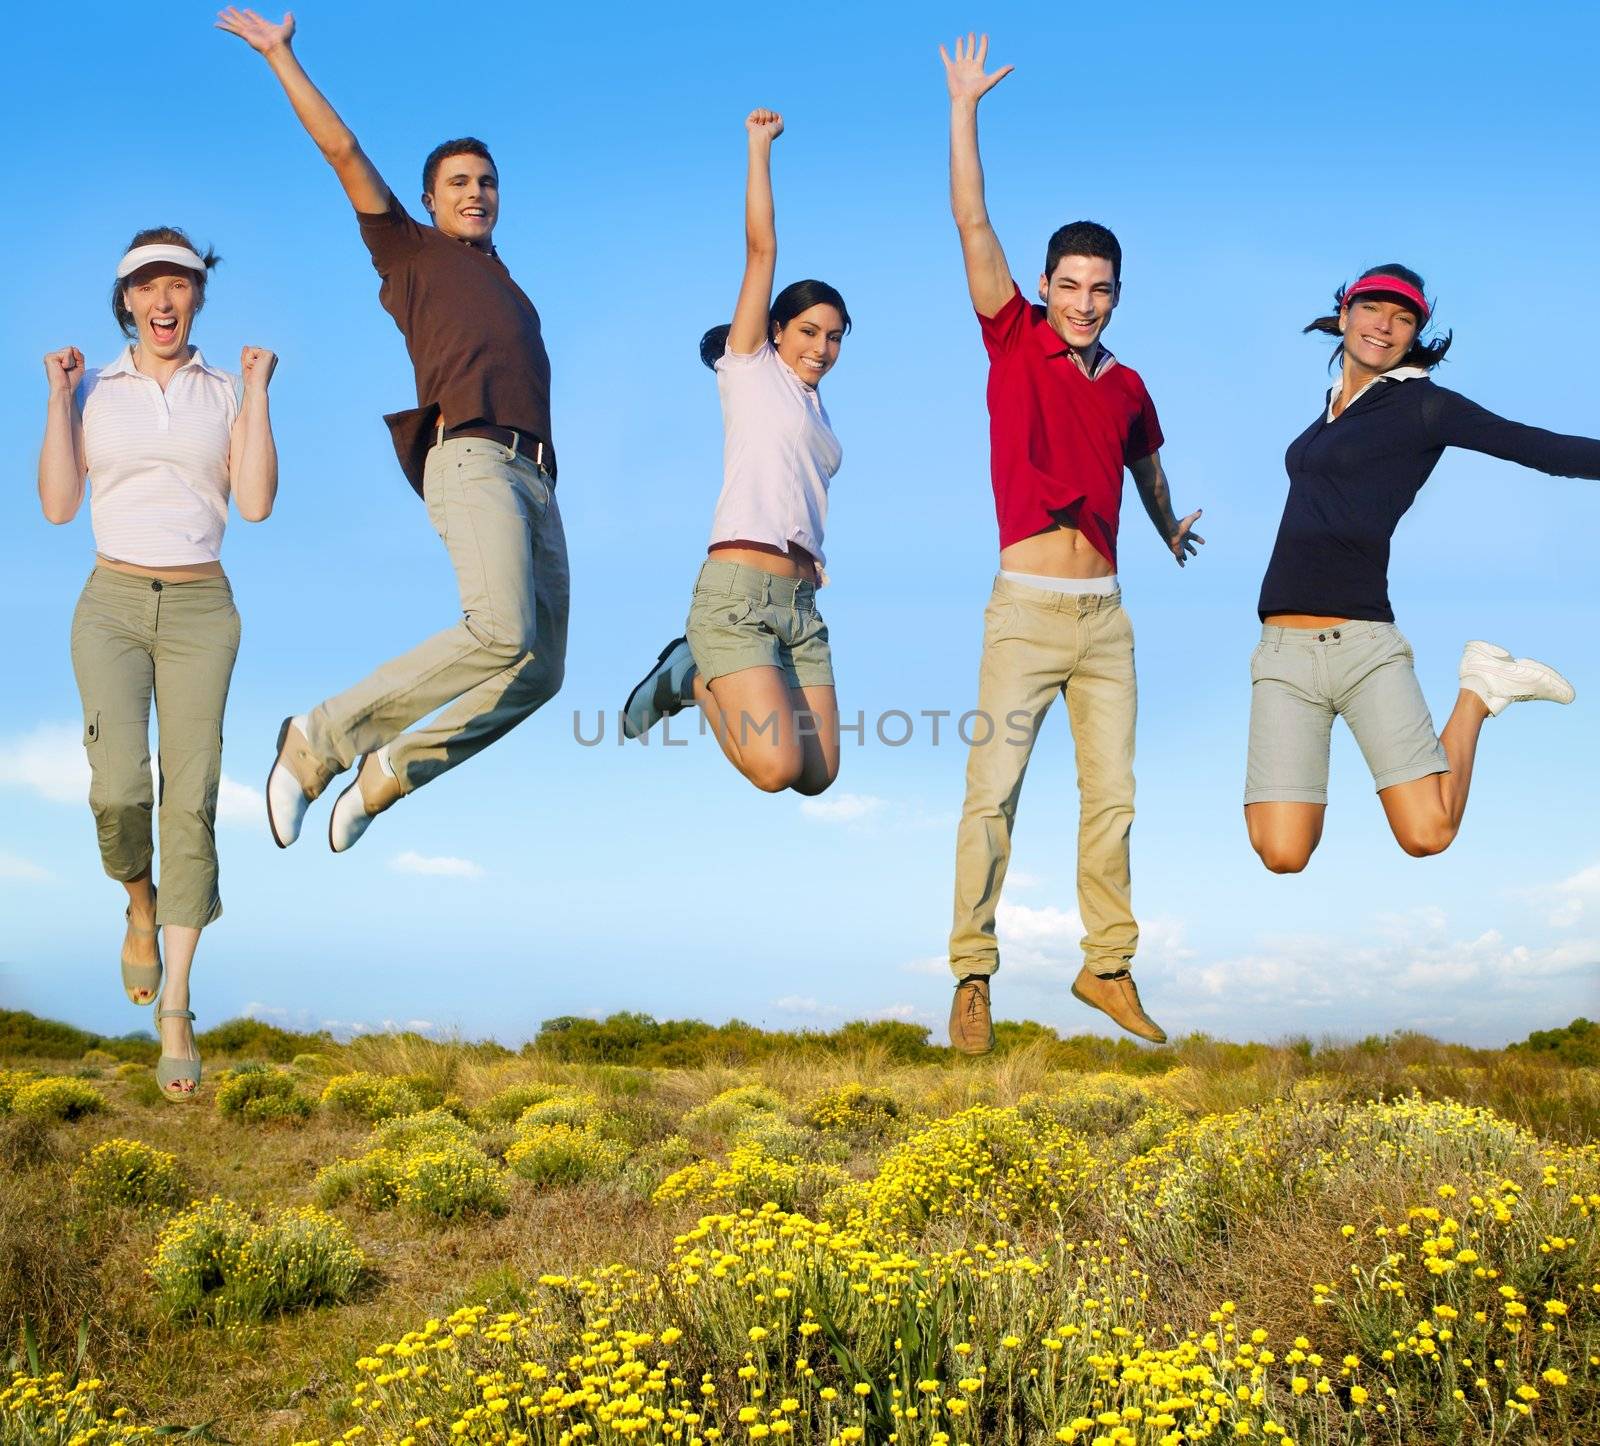 Jumping young people happy group on yellow flowers by lunamarina